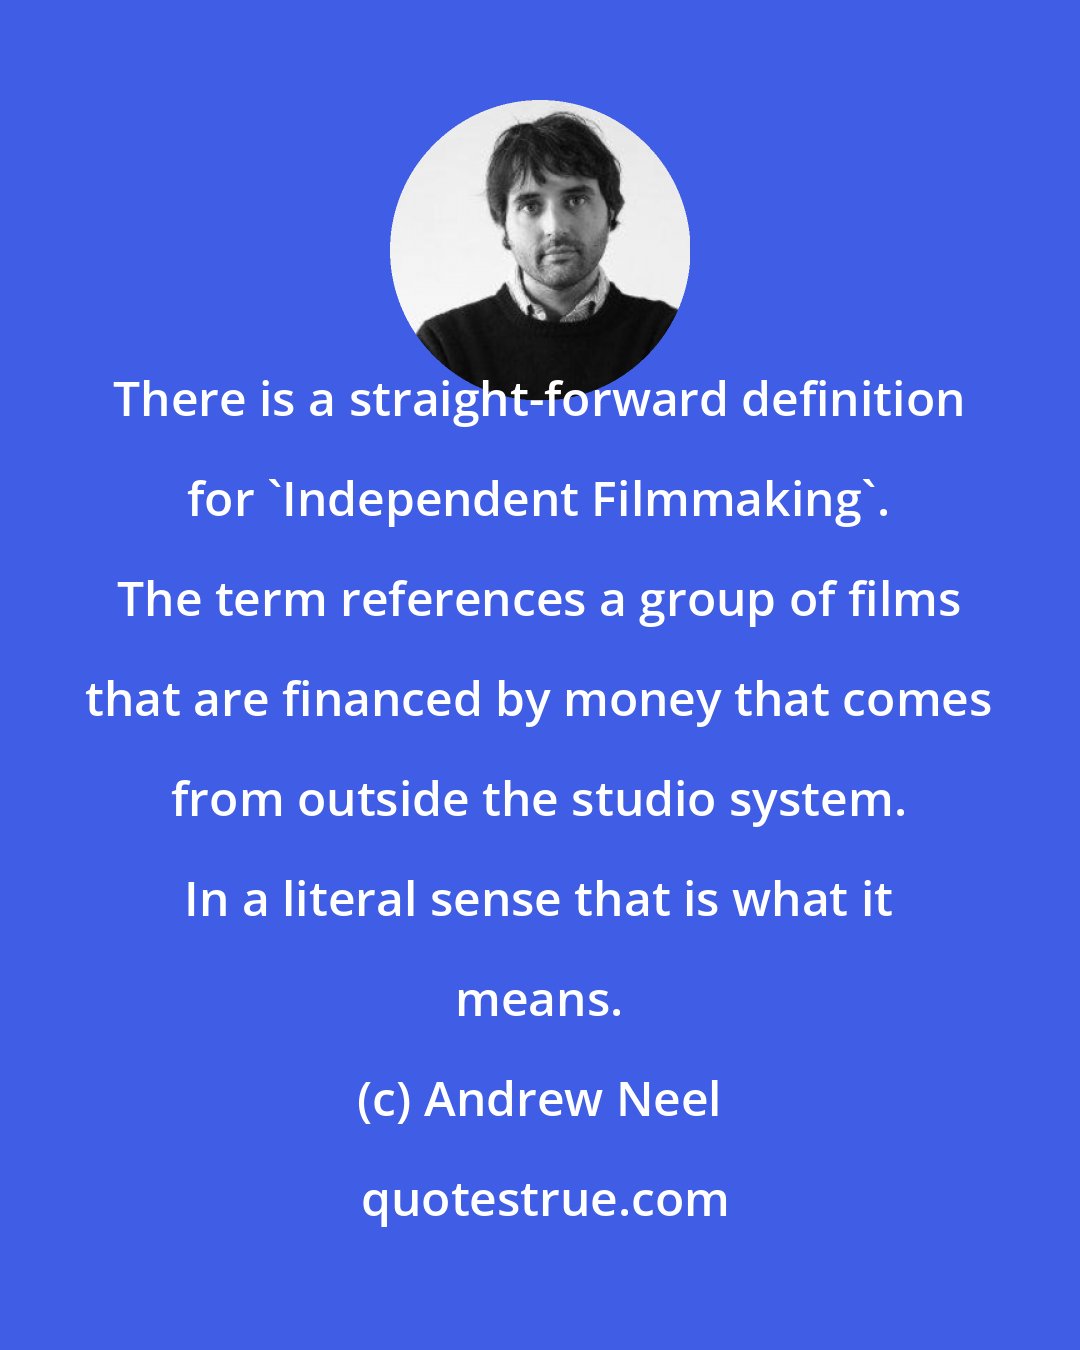 Andrew Neel: There is a straight-forward definition for 'Independent Filmmaking'. The term references a group of films that are financed by money that comes from outside the studio system. In a literal sense that is what it means.